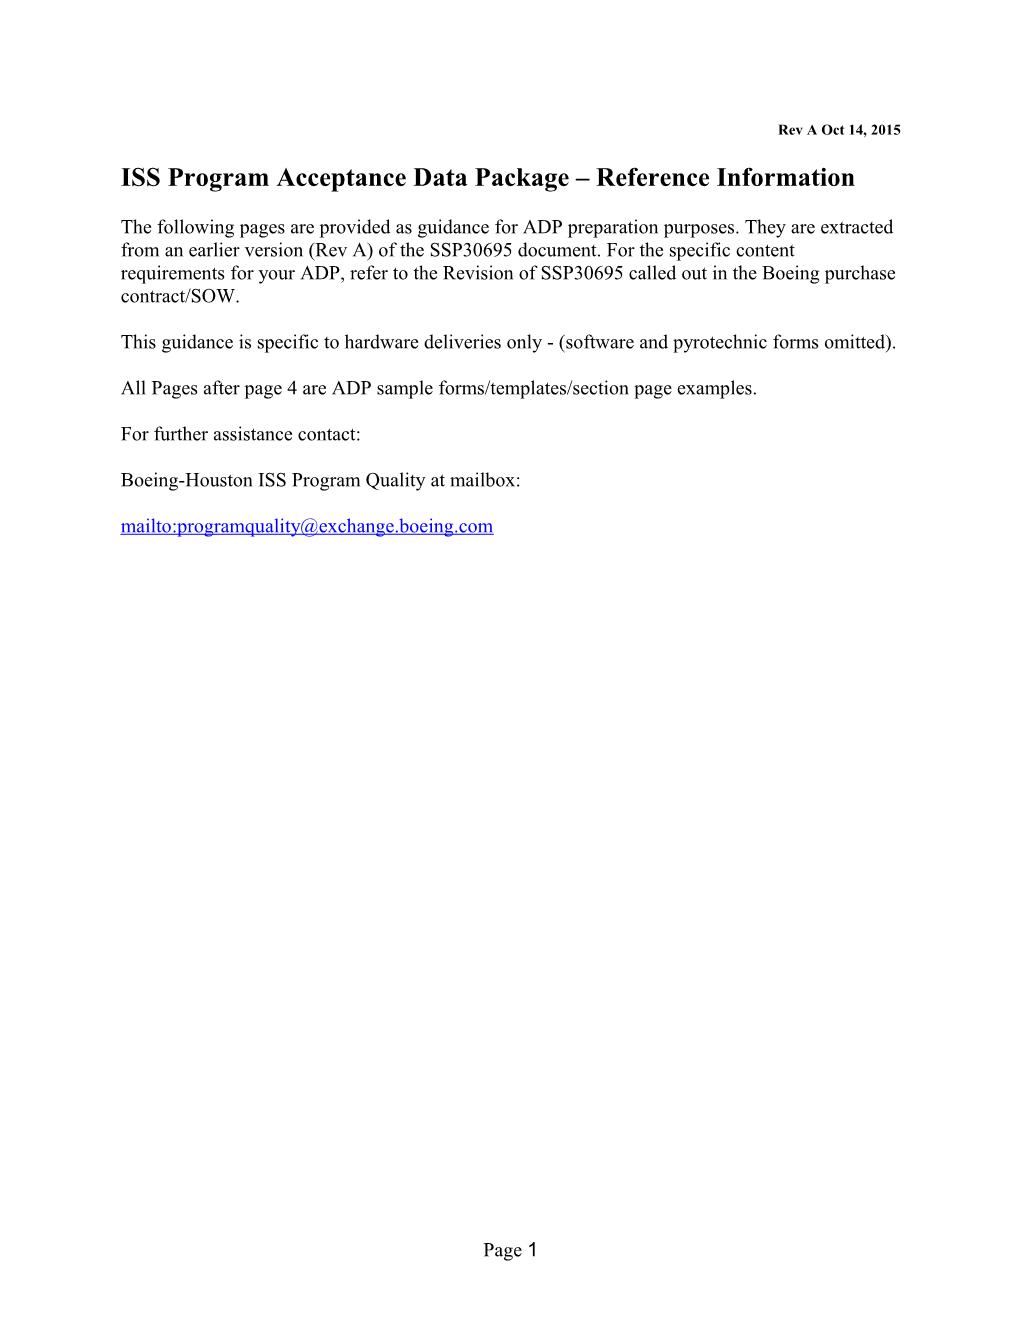 ISS Program Acceptance Data Package Reference Information